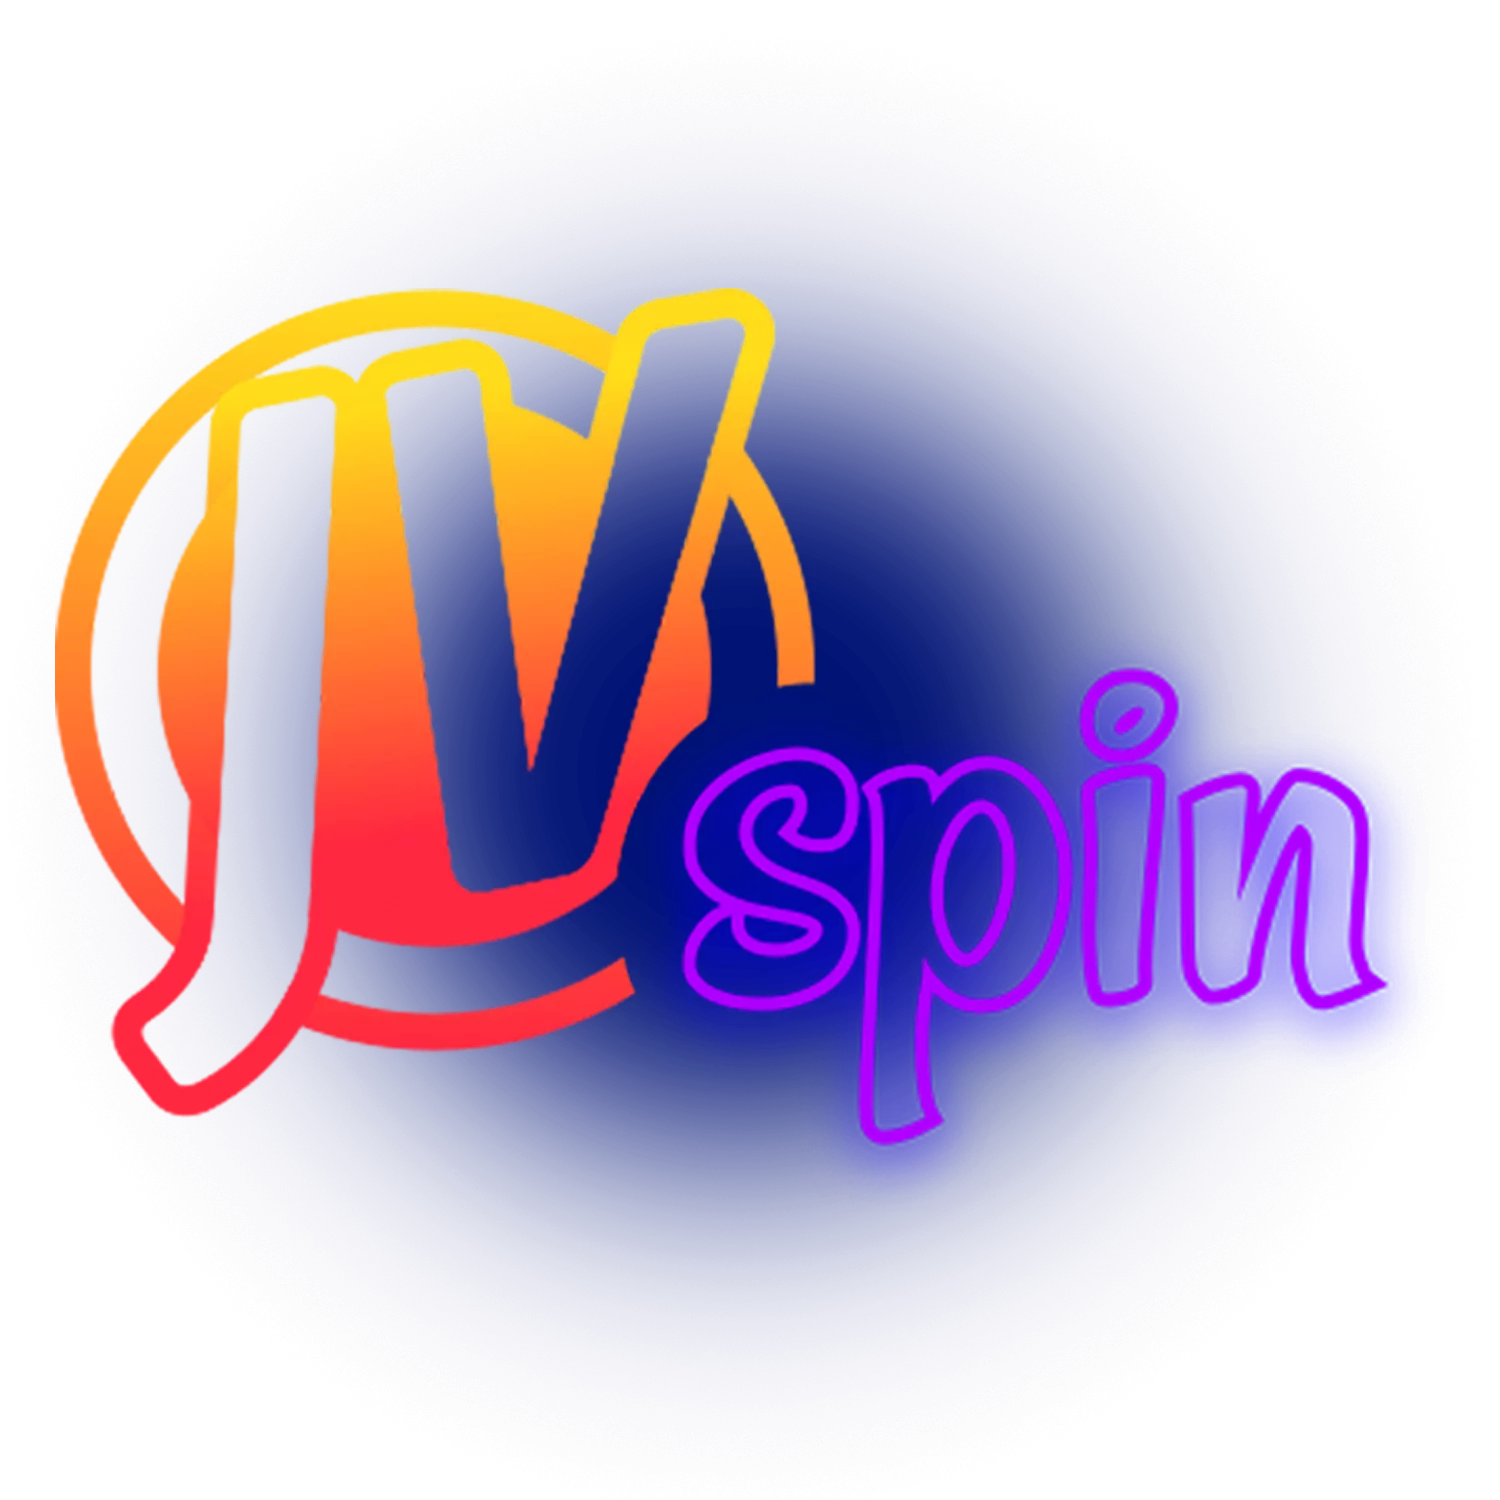 Read the review about the JVSpin Casino and start playing.